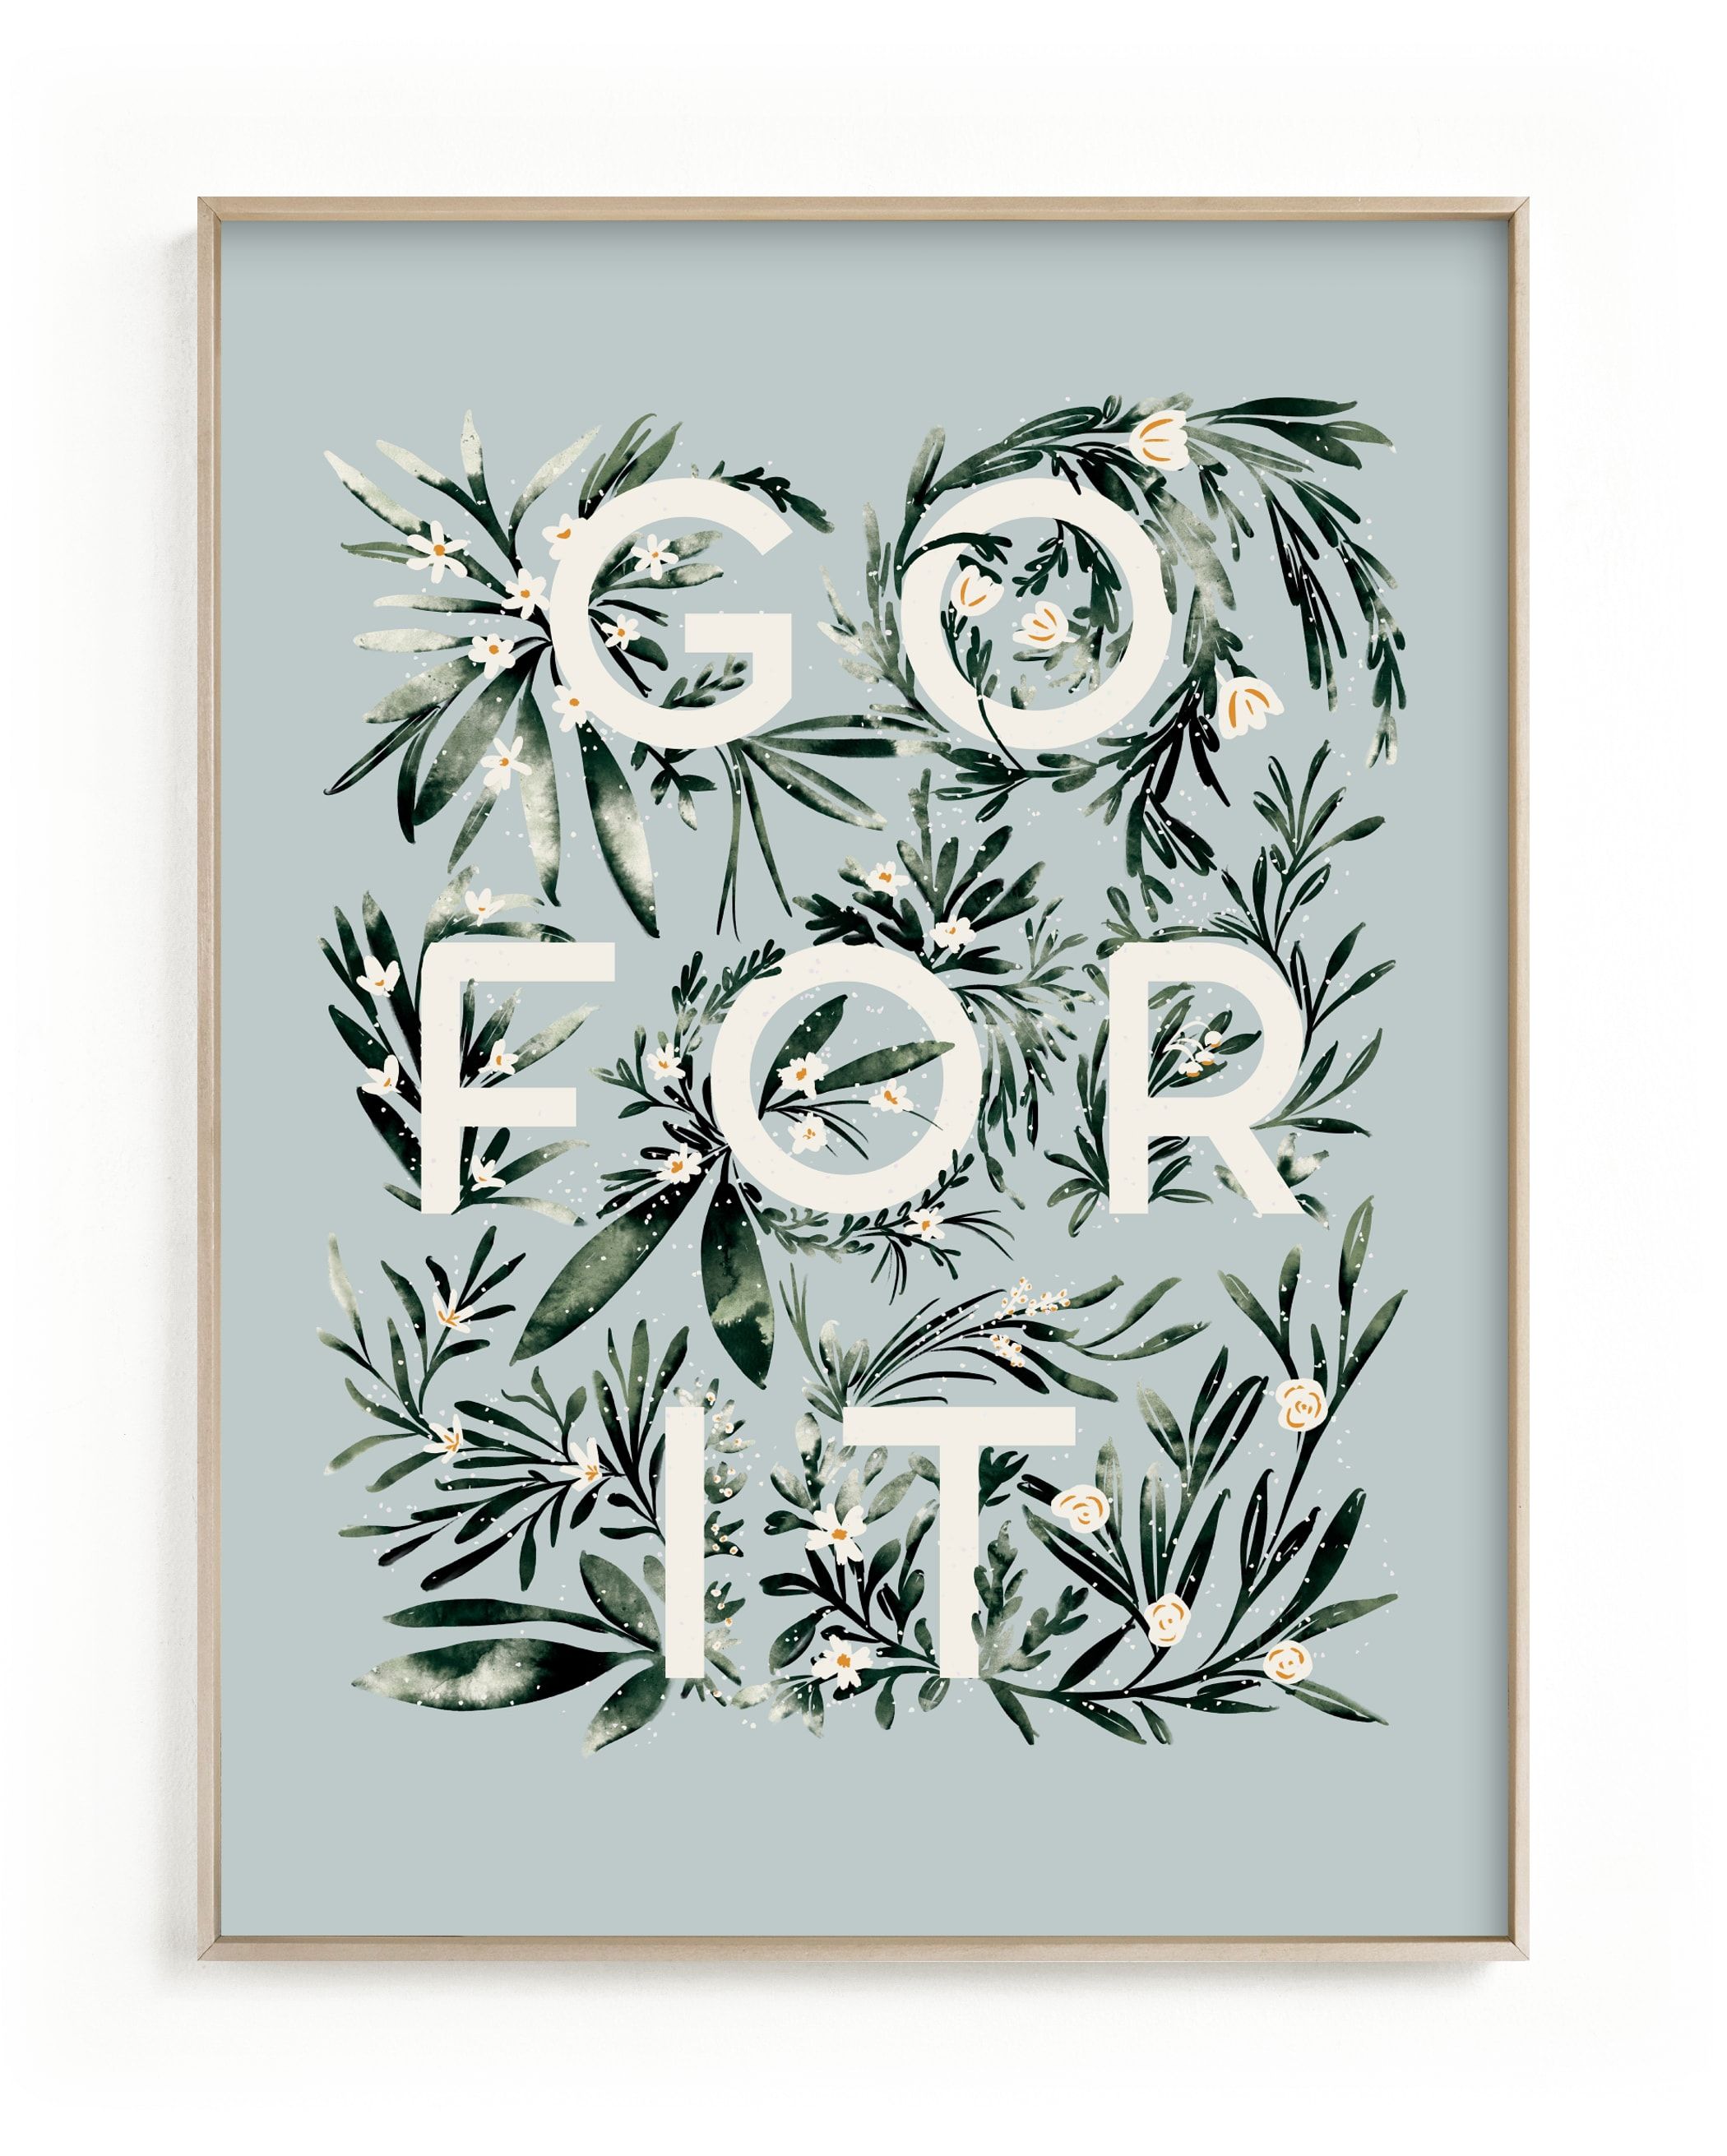 "Go For It" - Mixed Media Limited Edition Art Print by Gwen Bedat. | Minted